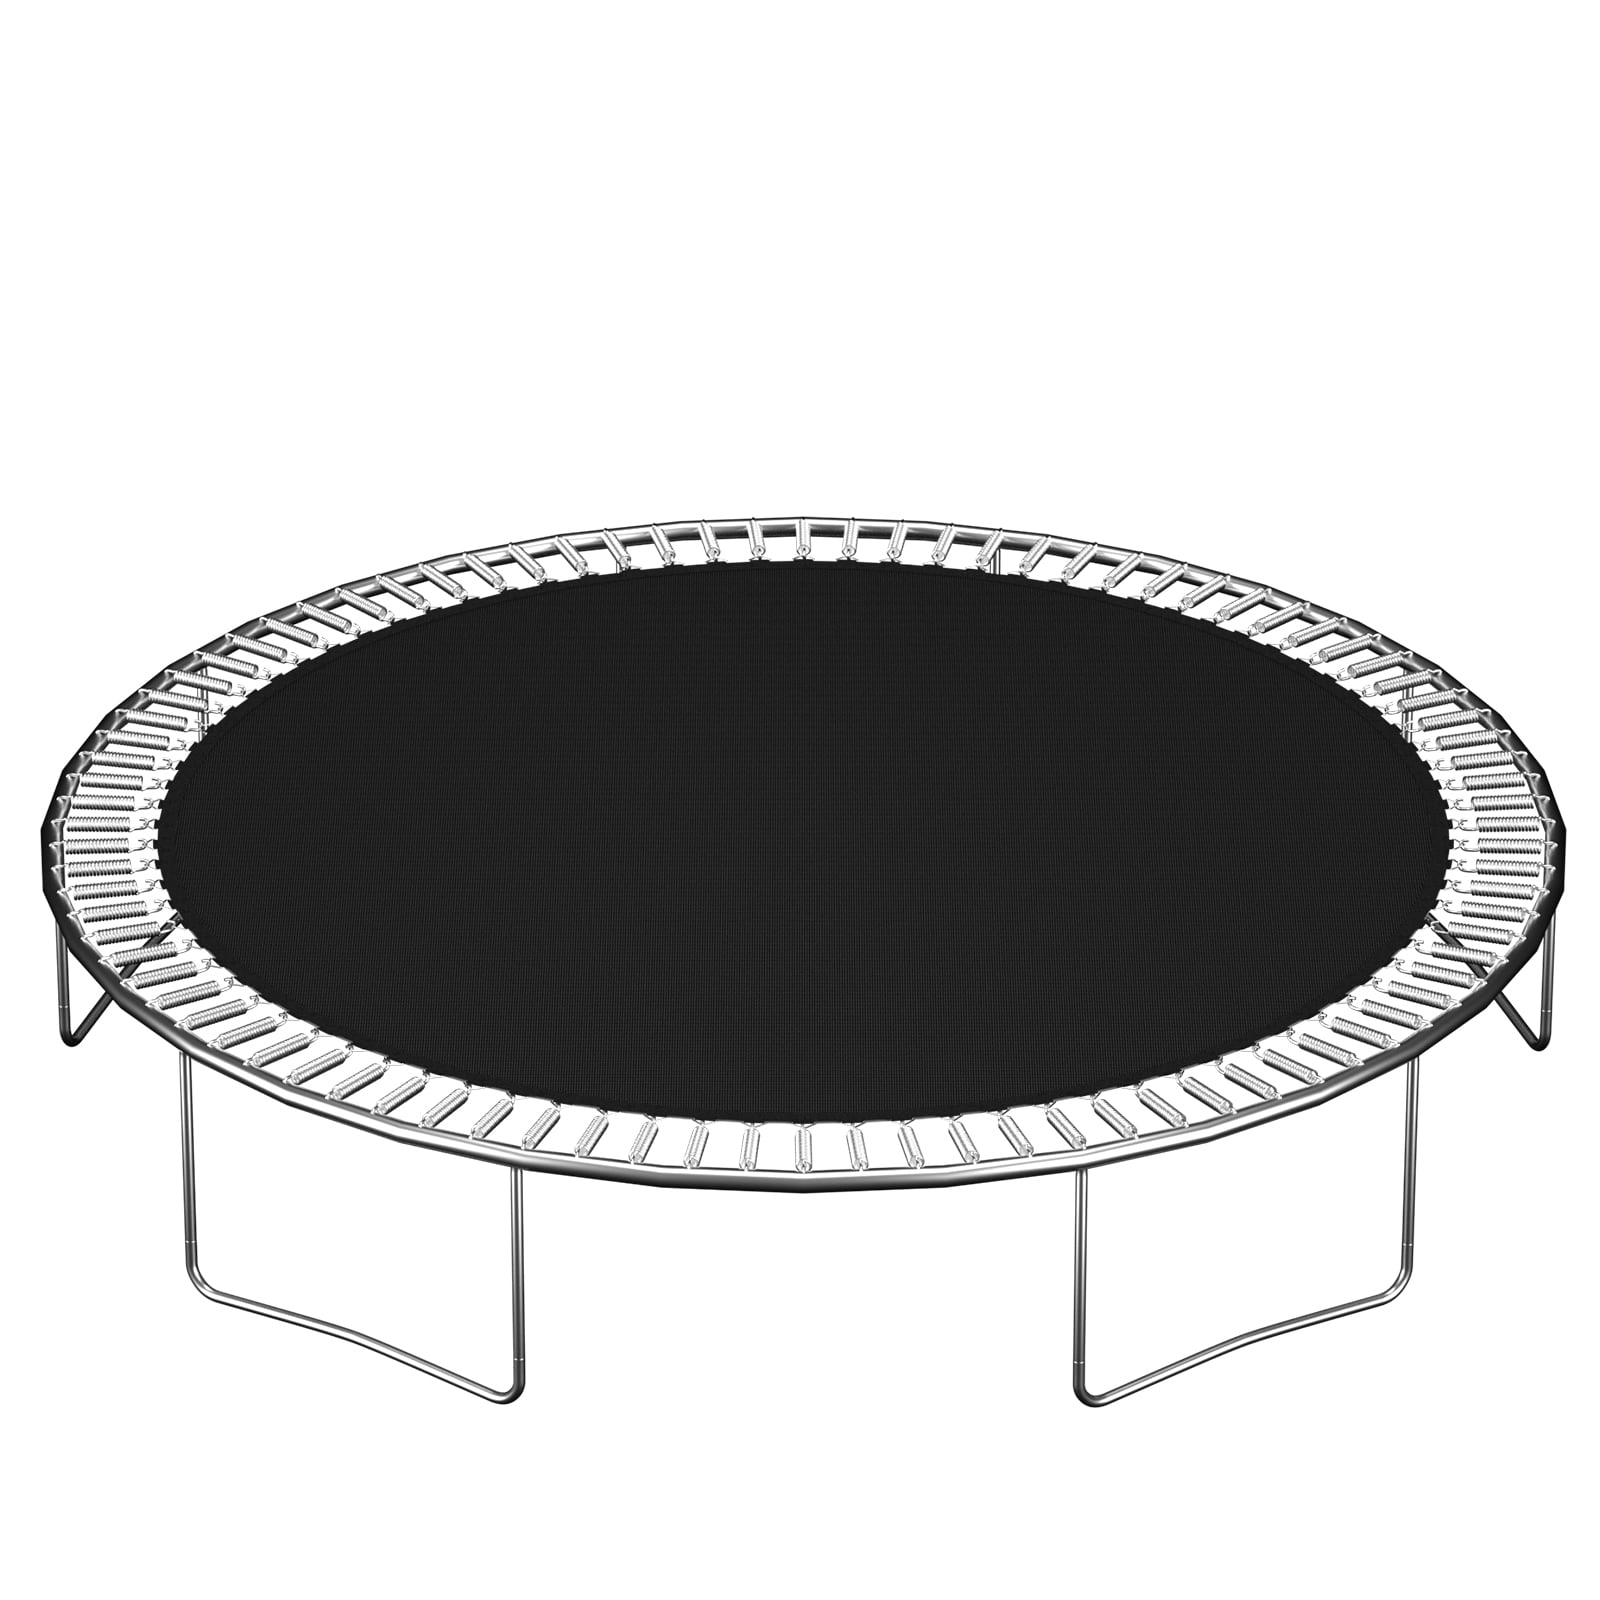 Round Waterproof Trampoline Mat Replacement Fits 15' Frame 96 Rings 7" Spring 